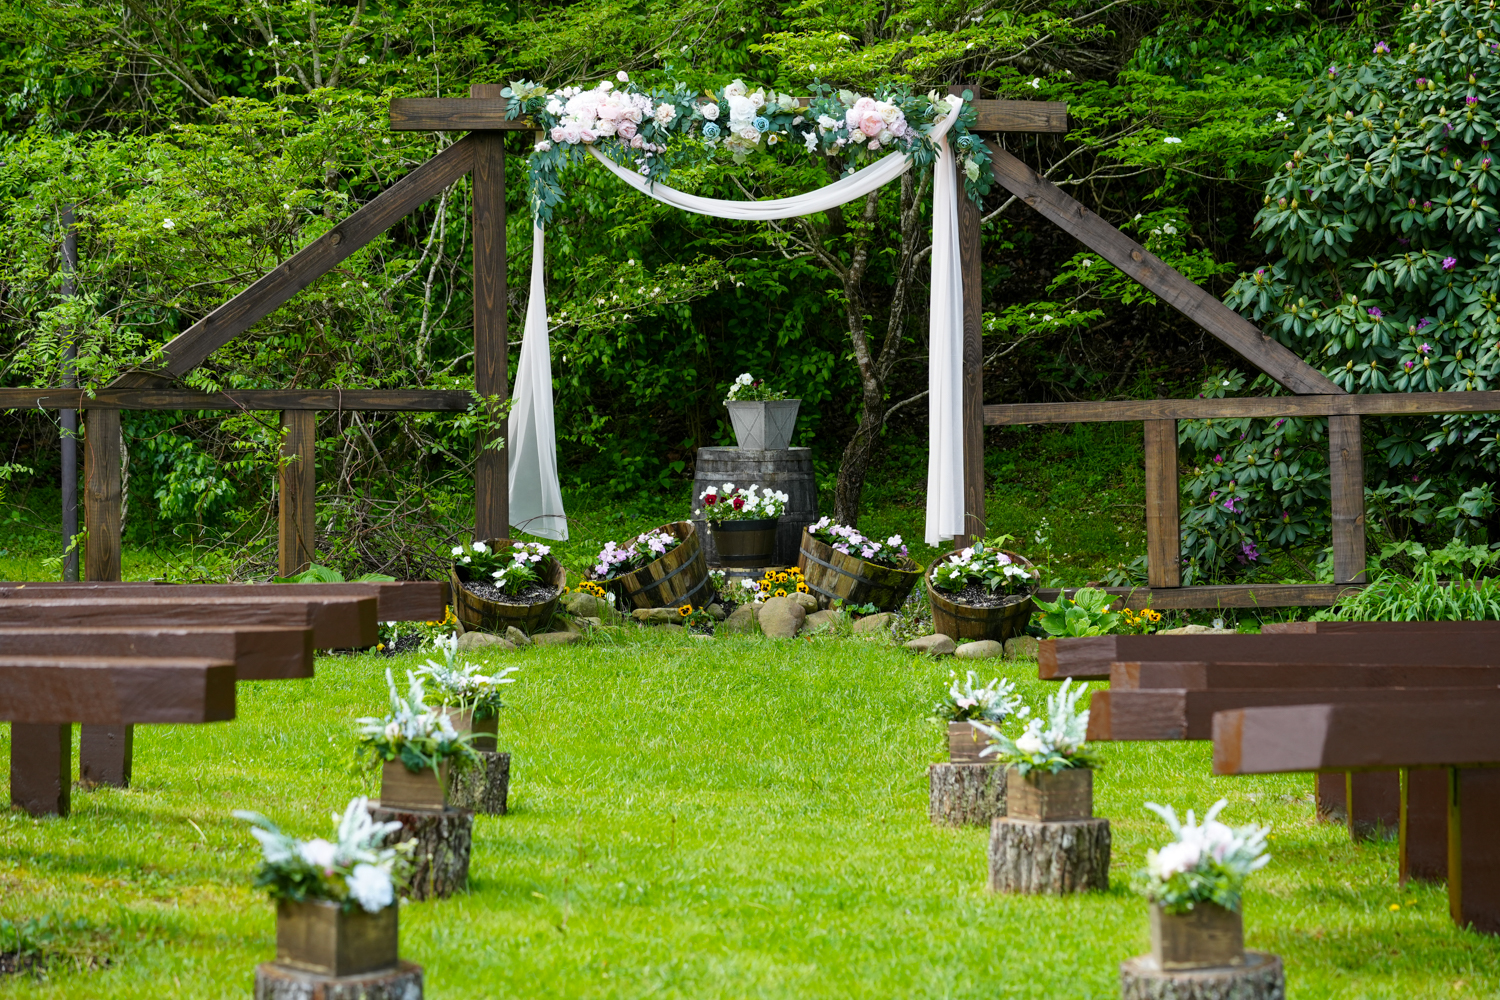 Wooden wedding arbor called Creekside Ridge at the Honeysuckle Hills wedding venue with dark brown benches and flowers in wooden vases sitting on top of stumps leading to a pink drape and lings moments garlands on the arbor